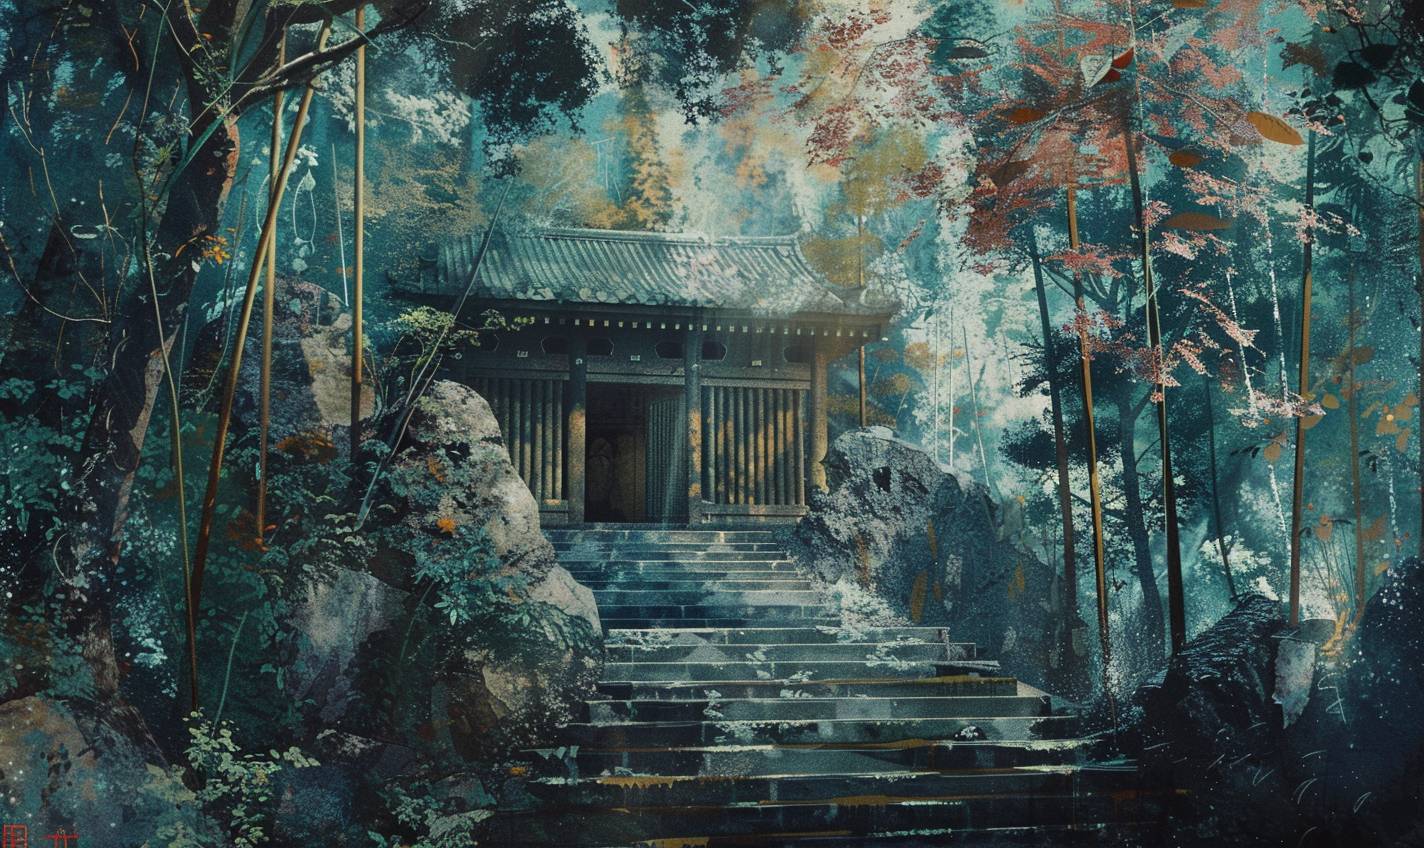 In the style of Kunisada, a forgotten temple hidden in the jungle